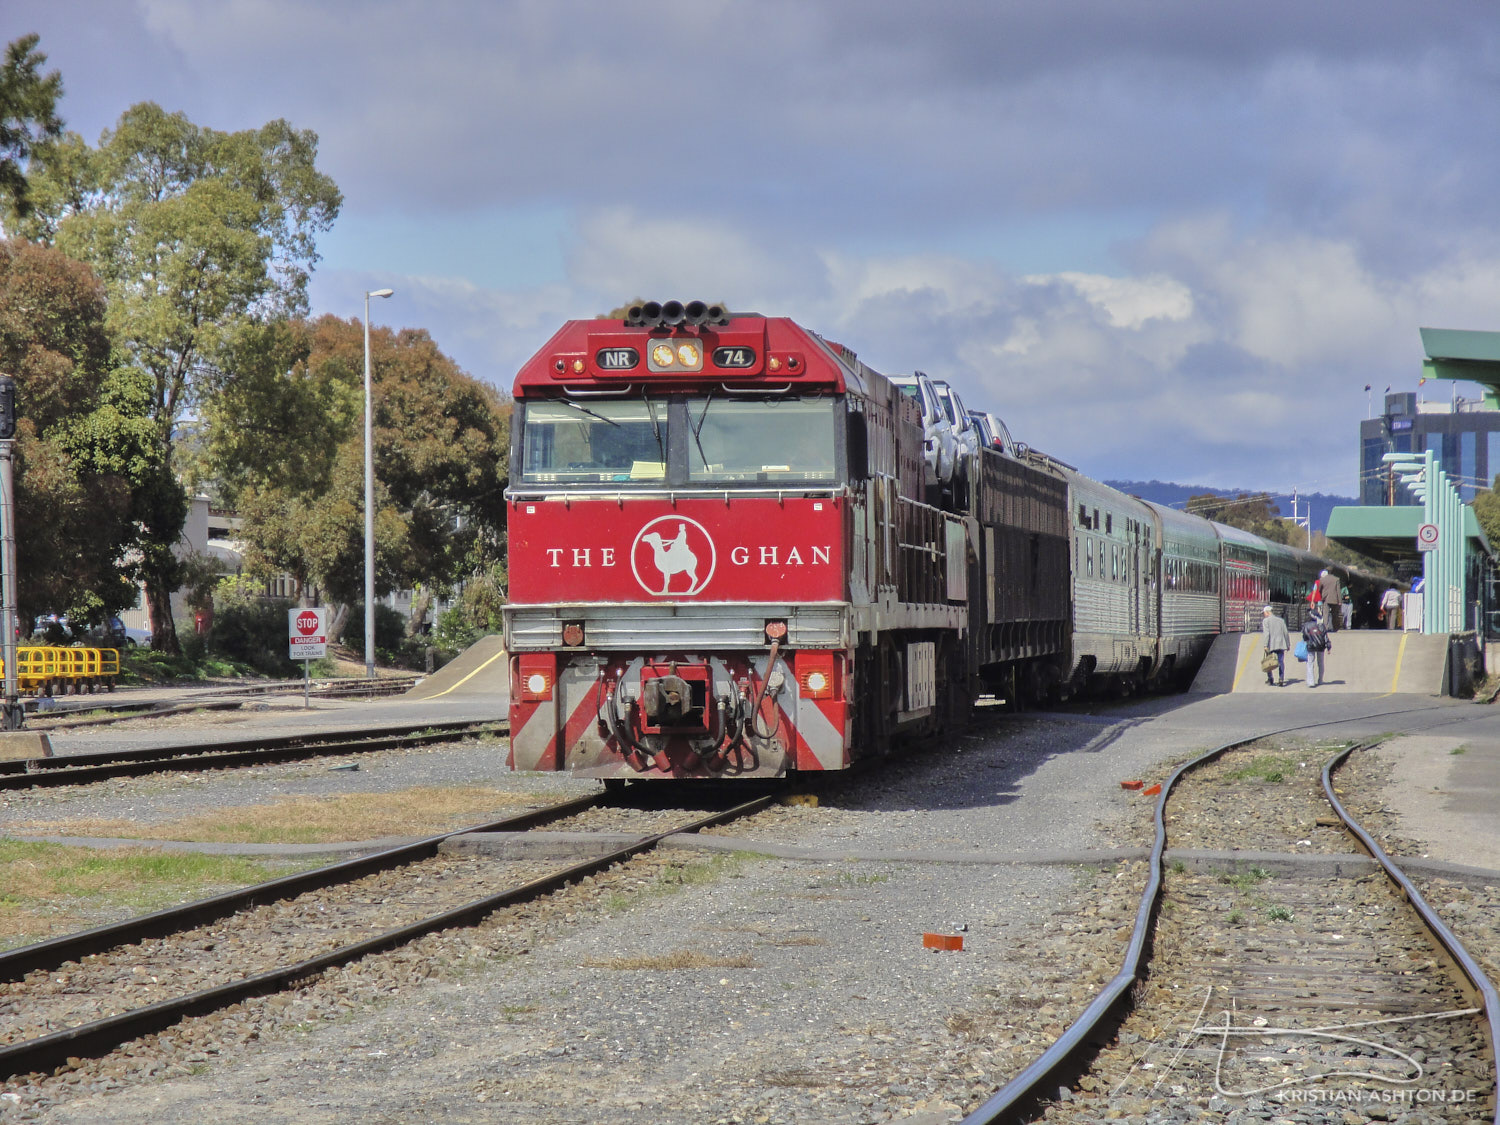 Our train - The Ghan